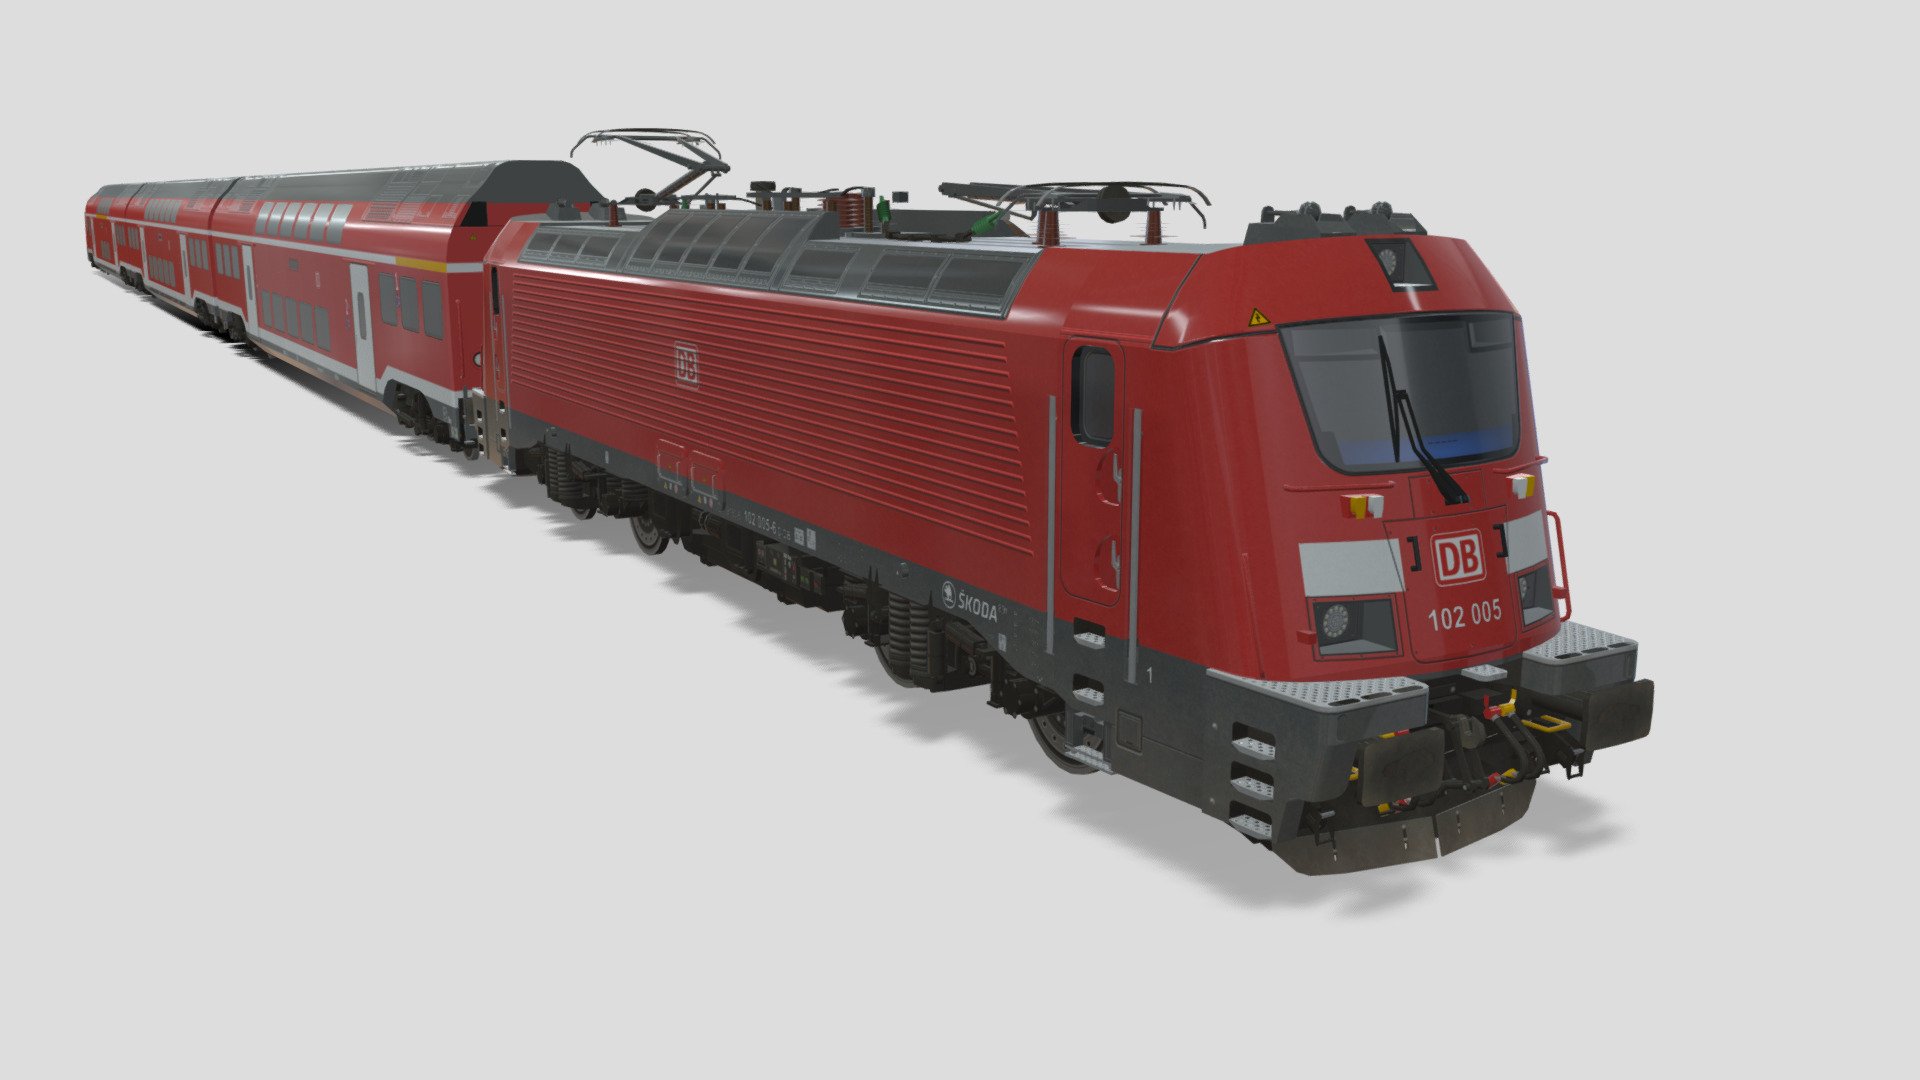 The Skoda Push-Pull Train Set is a double-decker, loco-hauled train set manufactured by Skoda Transportation. It is primarily used in general service in Czechia and in Germany on the München-Nürnberg Express line.

This model was originally made as an asset for the game Cities: Skylines. There are some minor simplifications to the texture and model to keep it optimised for the game.

This model includes a 3-car variant of the Skoda Dosto, although its real-life counterpart is 6-cars and re-uses the middle car.

Available formats: Wavefront OBJ (.obj), Autodesk FBX (.fbx), STL (.stl)

Polygon count: 22,372 Vertex count: 43,546

Model made in Blender 3.5 - Skoda Dosto Push-Pull Train - Buy Royalty Free 3D model by Nostrix 3d model